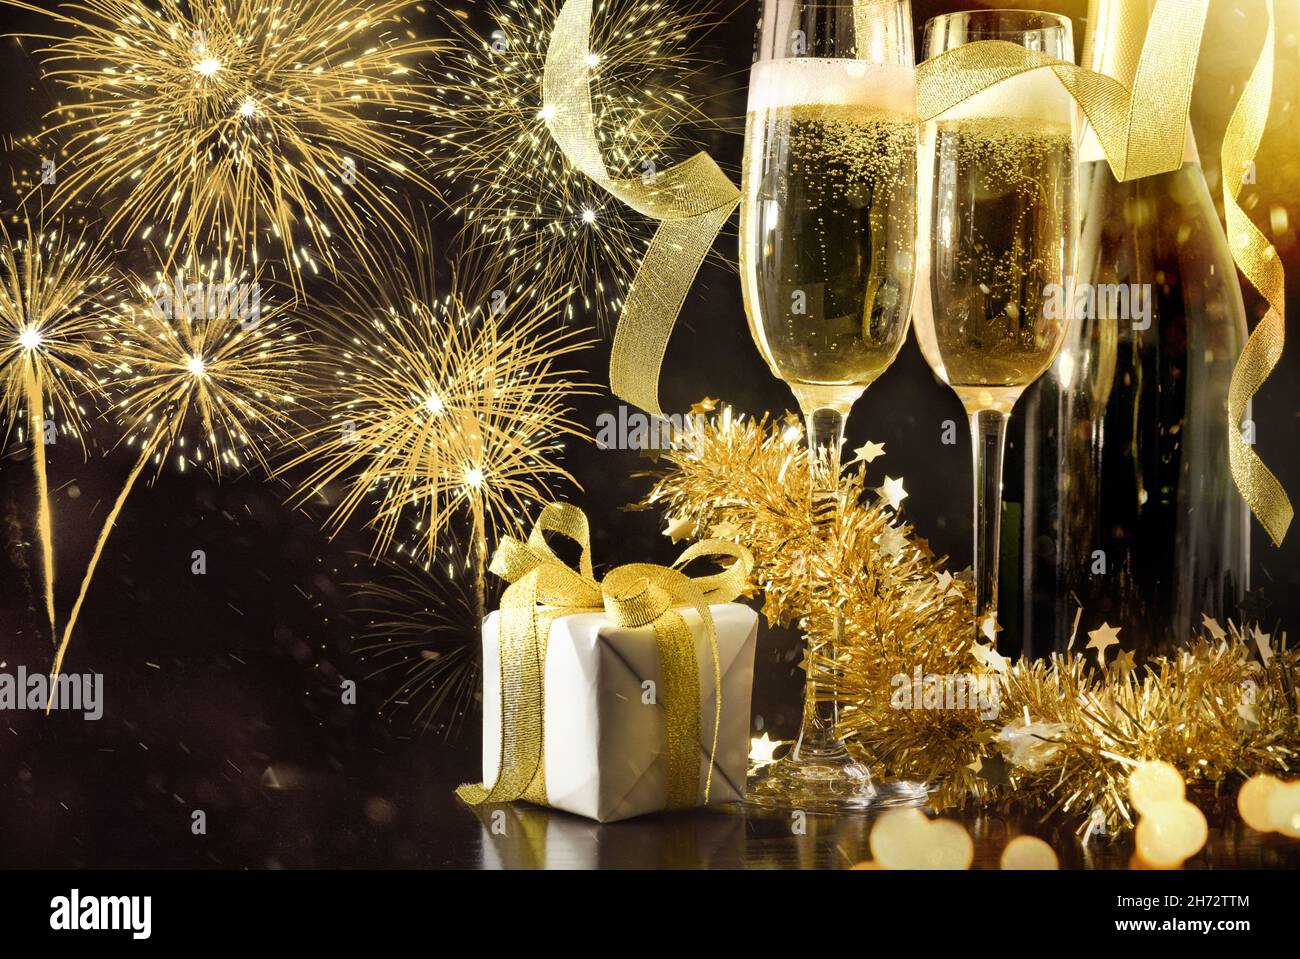 New year's eve party celebration background with sparkling wine glasses and bottle decorated with gift ribbons and golden decoration on black table an Stock Photo